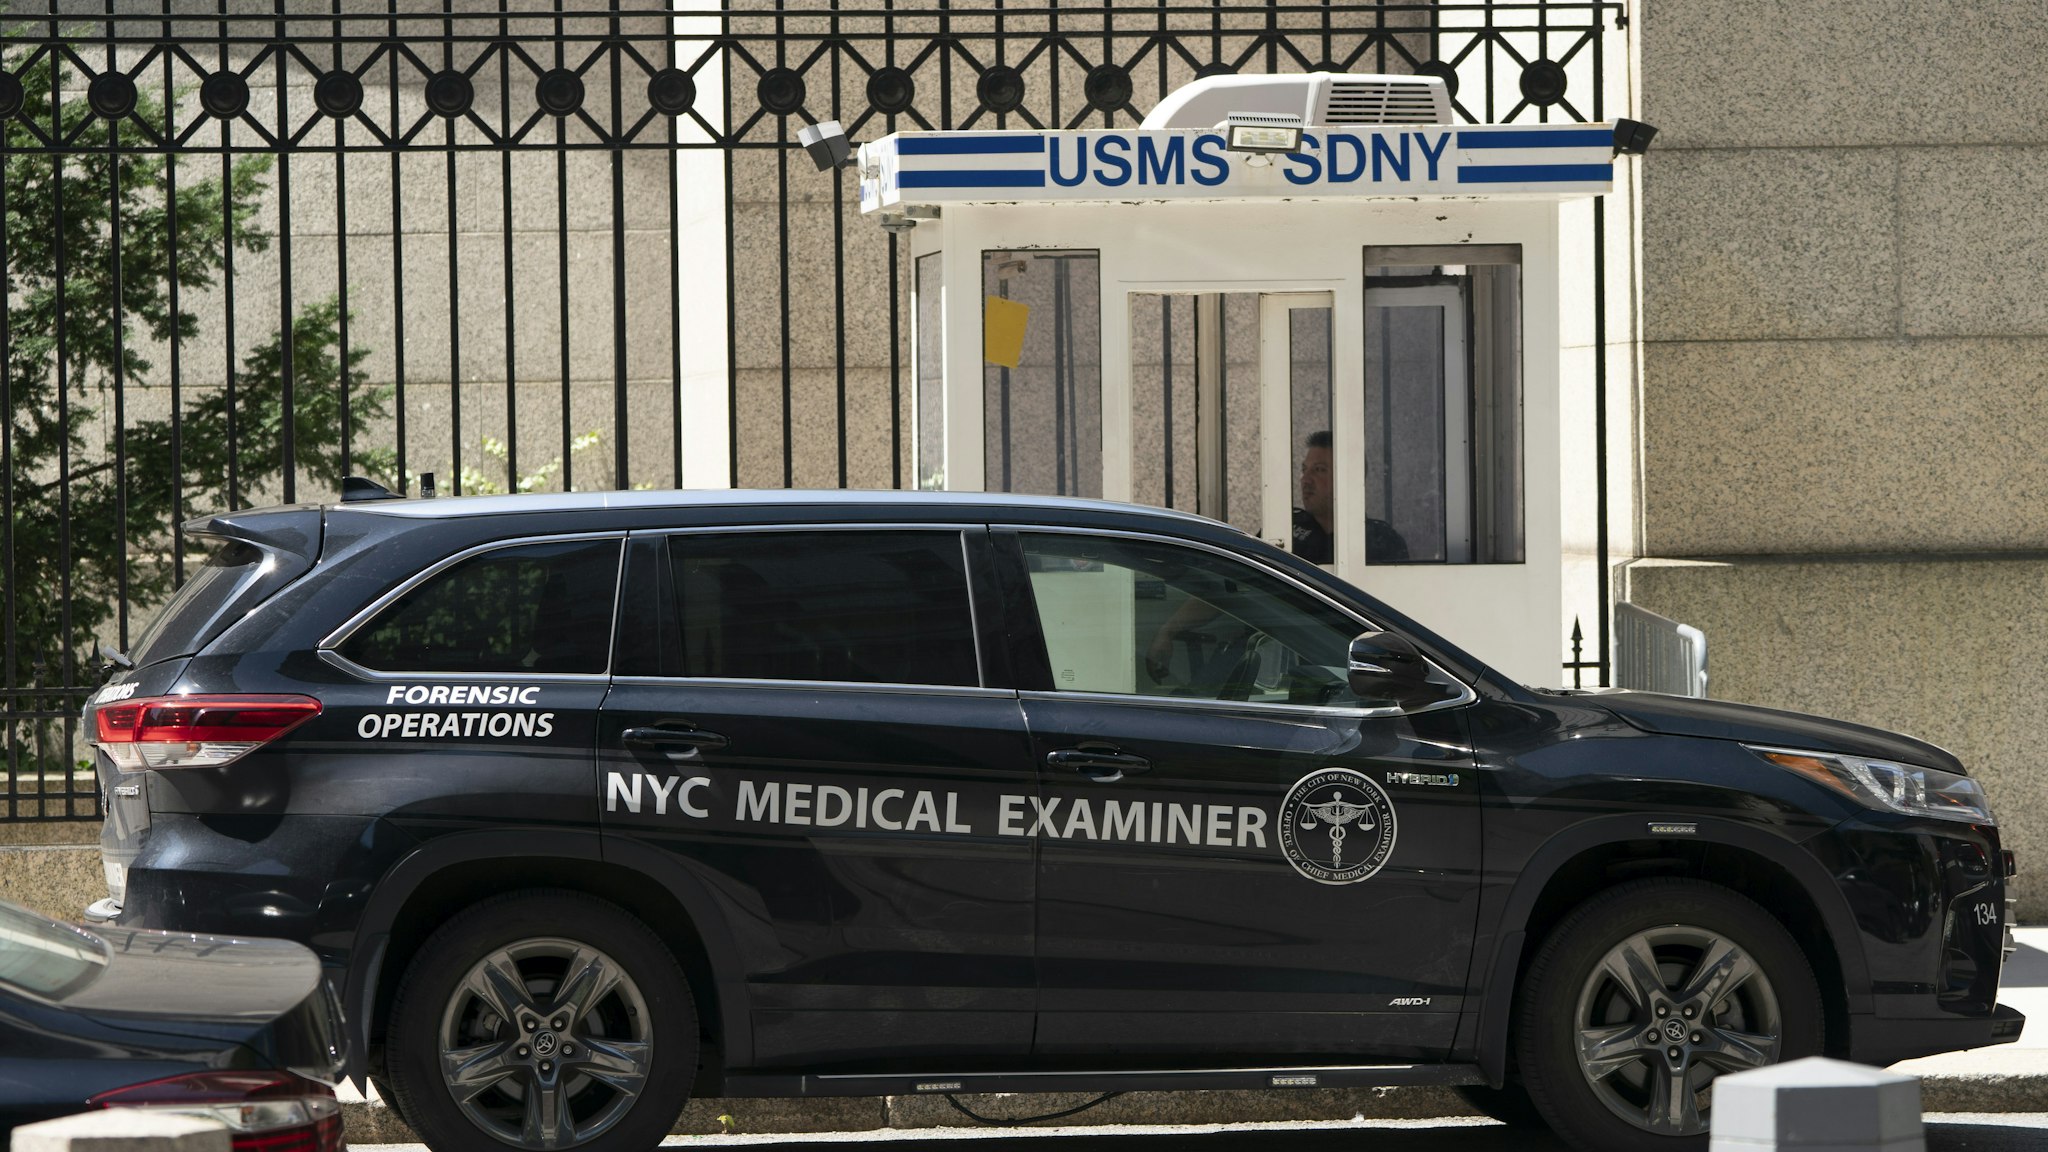 A New York Medical Examiner's car is parked outside the Metropolitan Correctional Center where financier Jeffrey Epstein was being held, on August 10, 2019, in New York. - Epstein has committed suicide in prison while awaiting trial on charges that he trafficked underage girls for sex, officials and media reported Saturday, sparking an FBI investigation. Epstein, a convicted pedophile who befriended numerous politicians and celebrities over the years, was found unresponsive in his cell at the Metropolitan Correctional Center from "an apparent suicide", the US Department of Justice said. (Photo by Don Emmert / AFP) (Photo credit should read DON EMMERT/AFP/Getty Images)